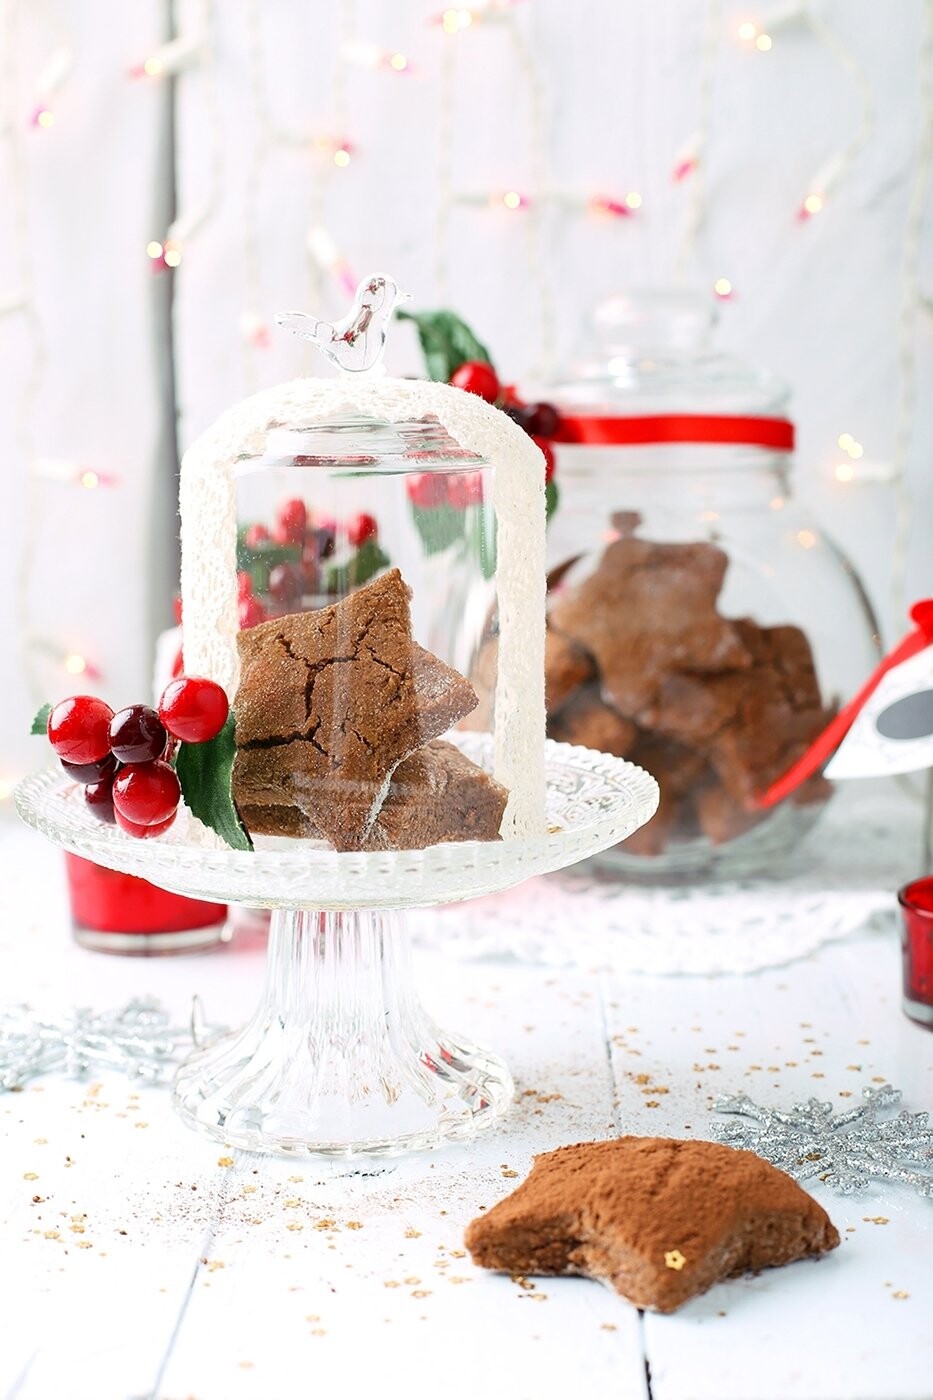 Gingerbread cookies - the picture was made for the christmassy issue of the Gluten Free Heaven Magazine, aiming to show gluten-free cookies as tasty as they can be.